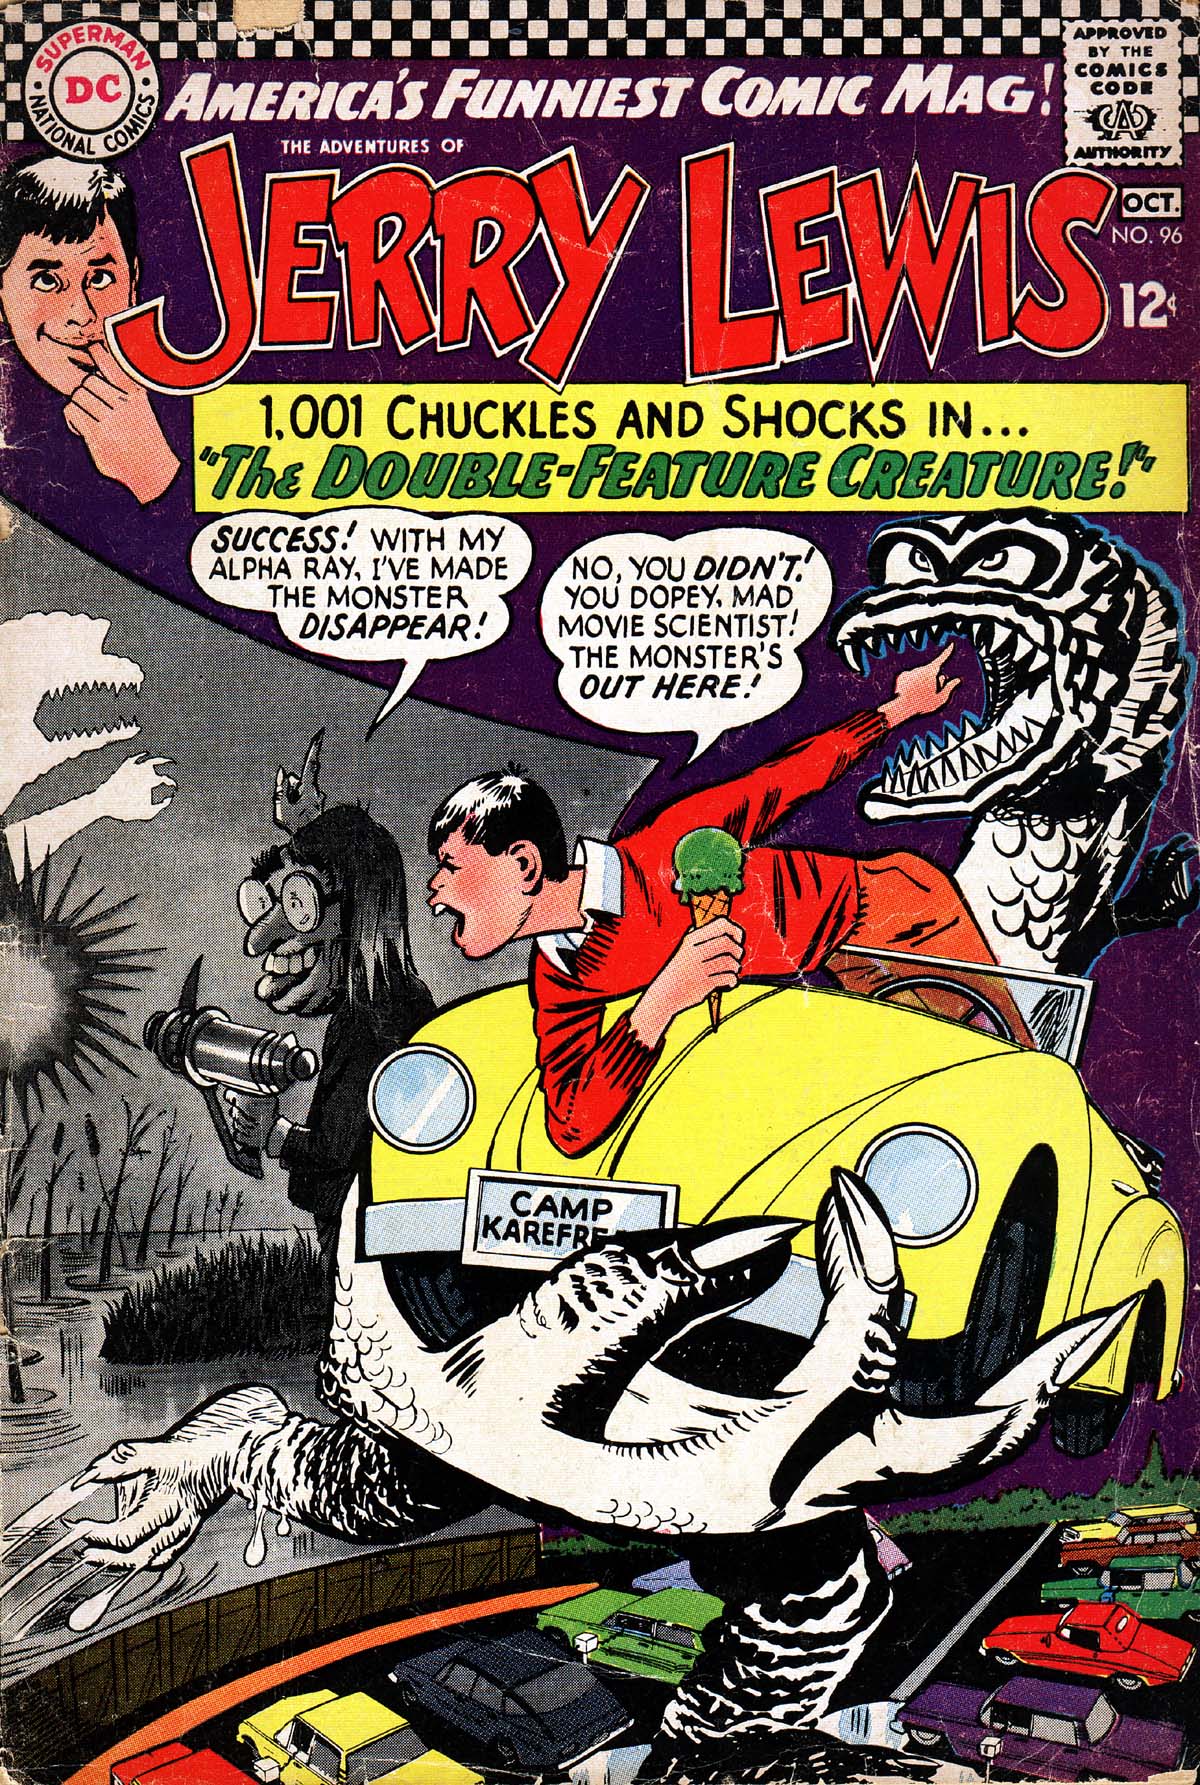 Read online The Adventures of Jerry Lewis comic -  Issue #96 - 1